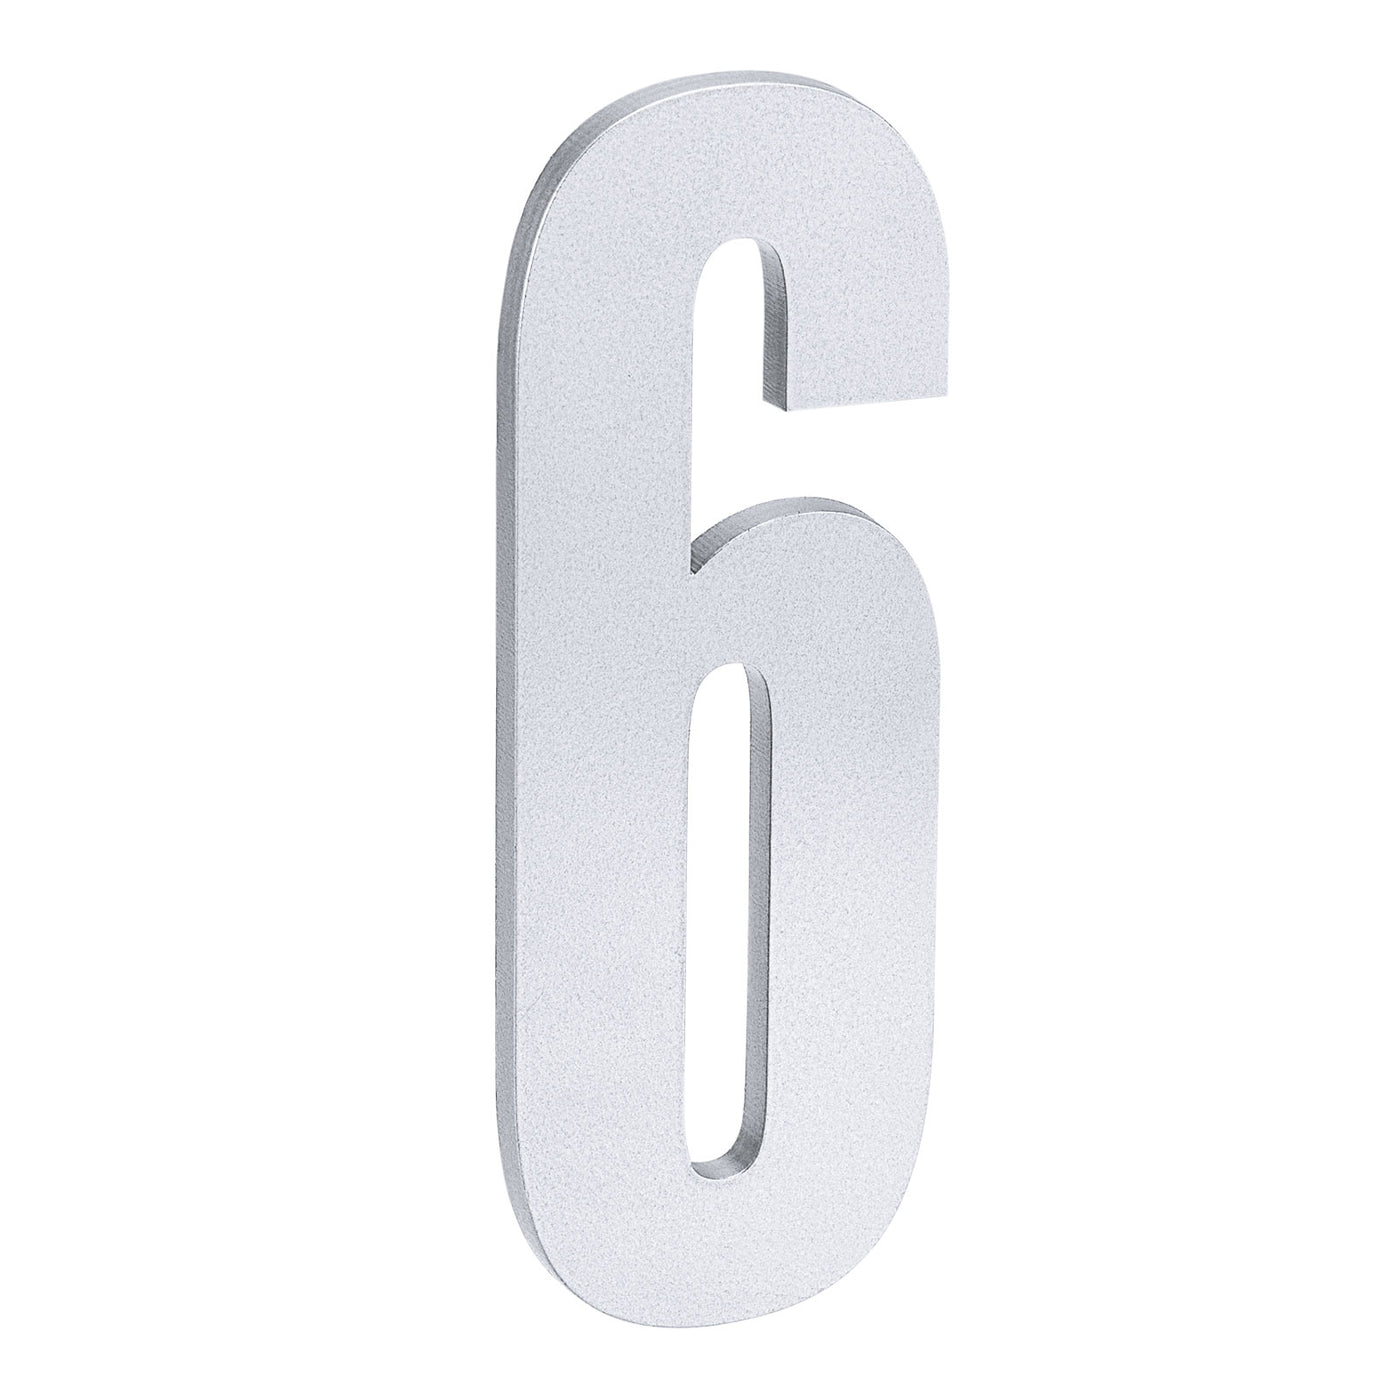 Uxcell Uxcell 4.72 Inch Self-Adhesive House Number for Hotel Mailbox Address, Silver Number 6